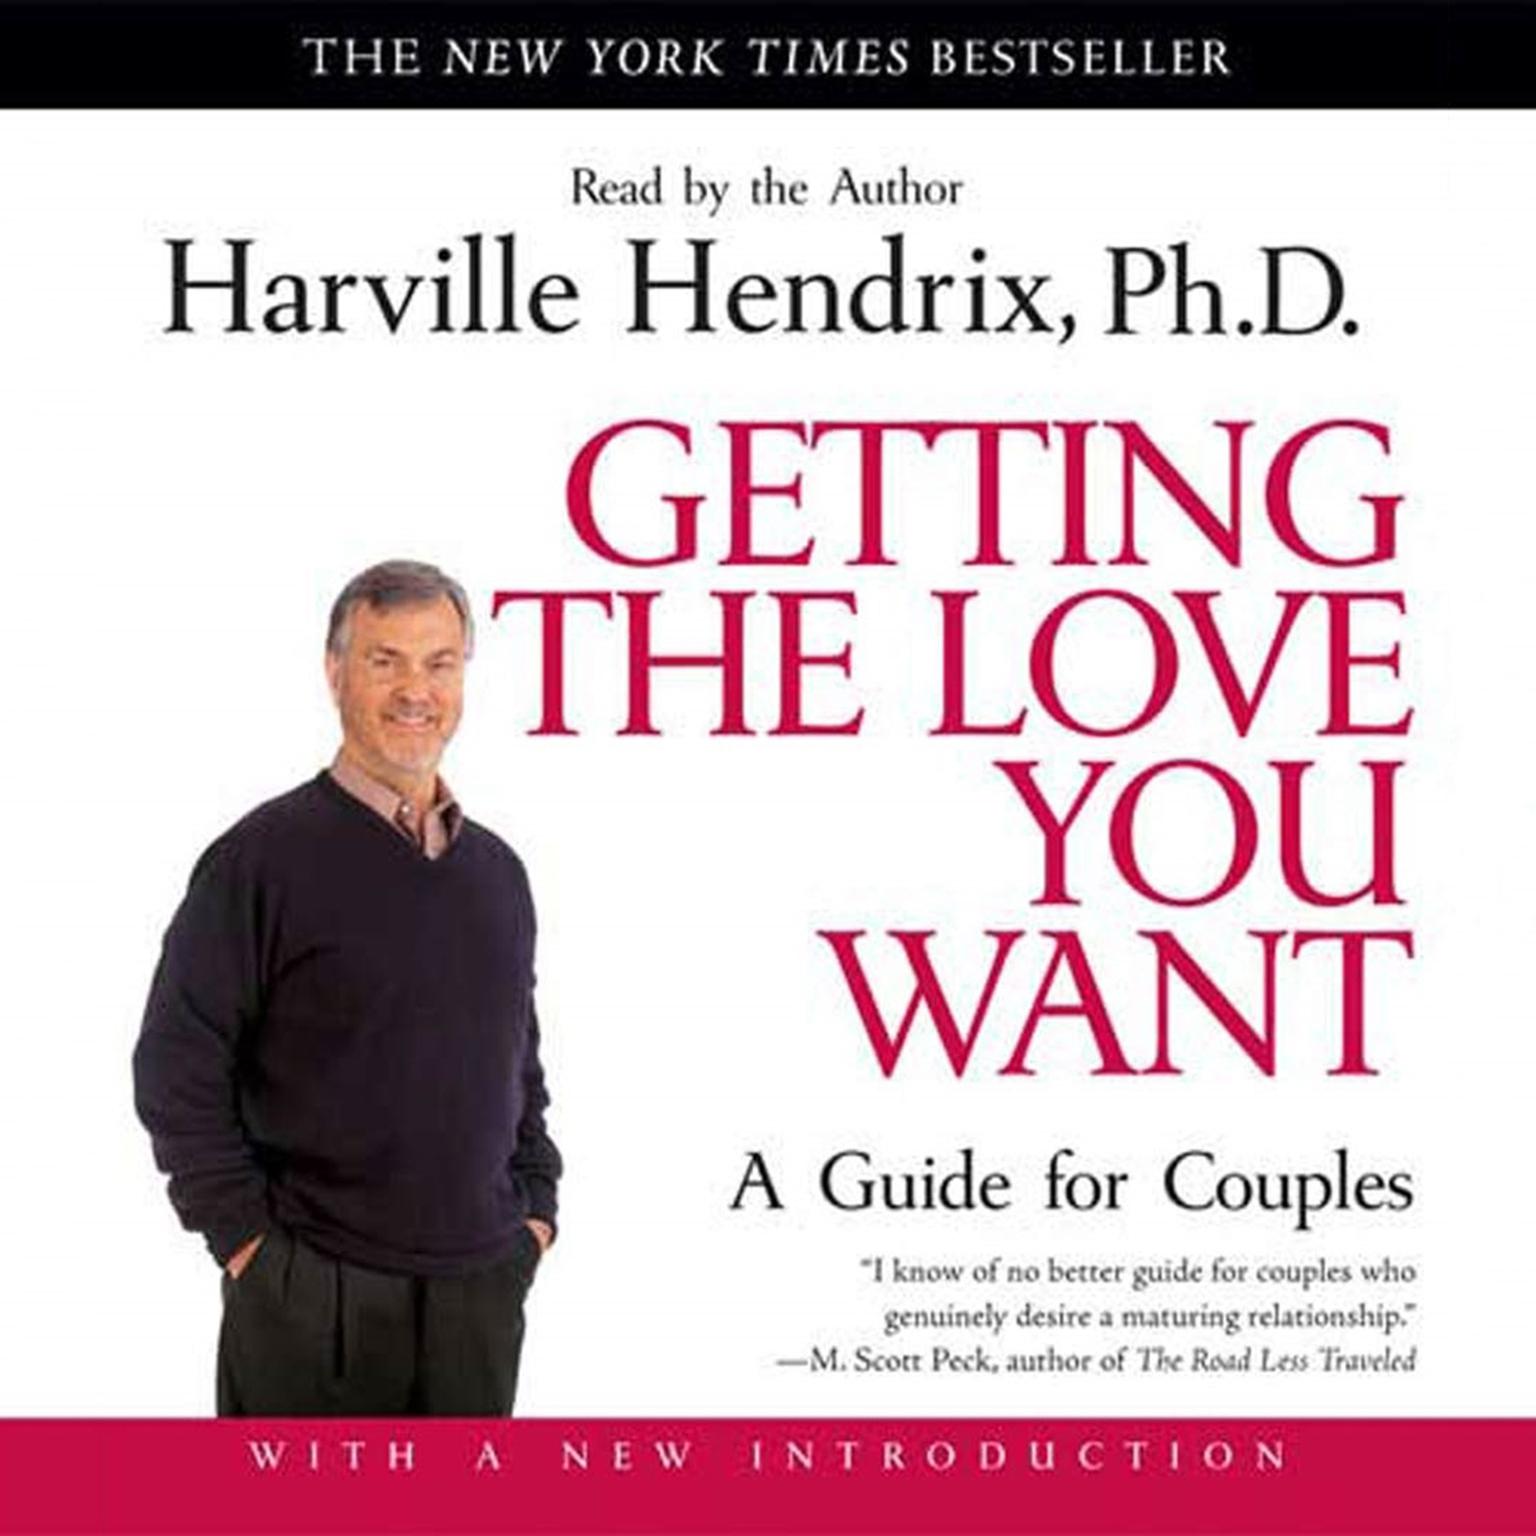 Getting the love you want audiobook free download xvideoservicethief apk free download